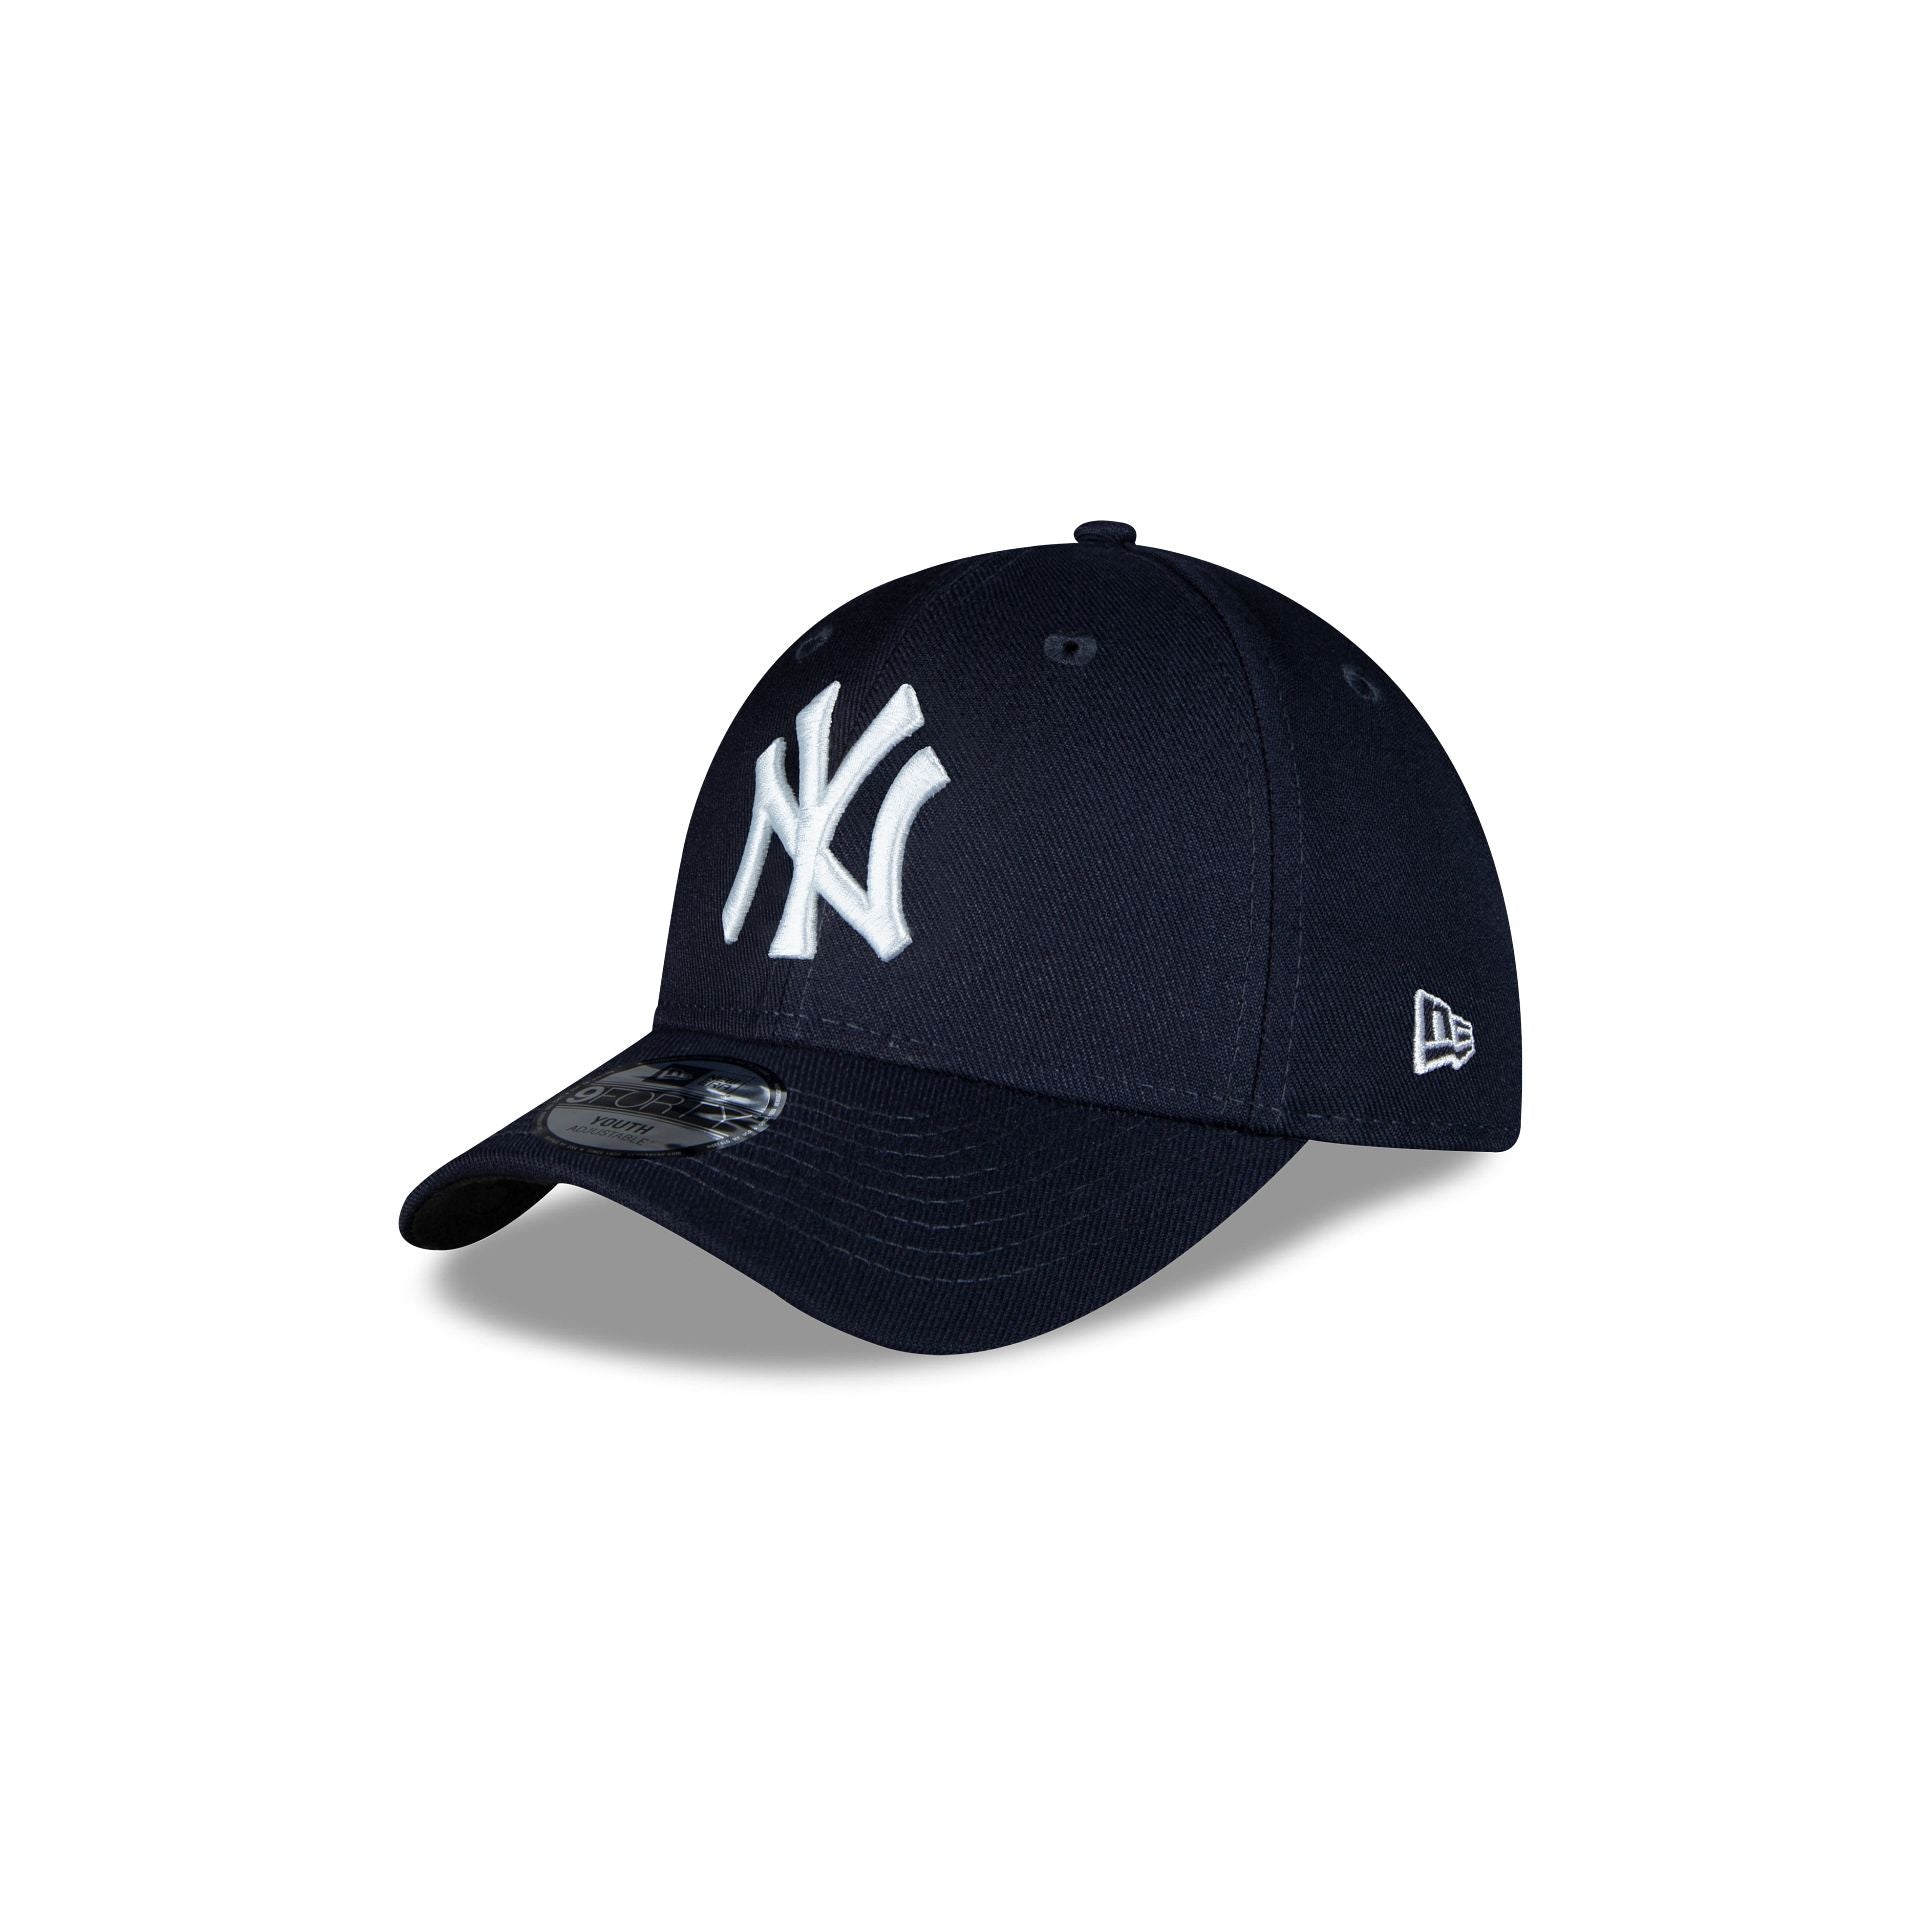 Cap Era New 9FORTY League The Adjustable New Yankees Kids York – Hat